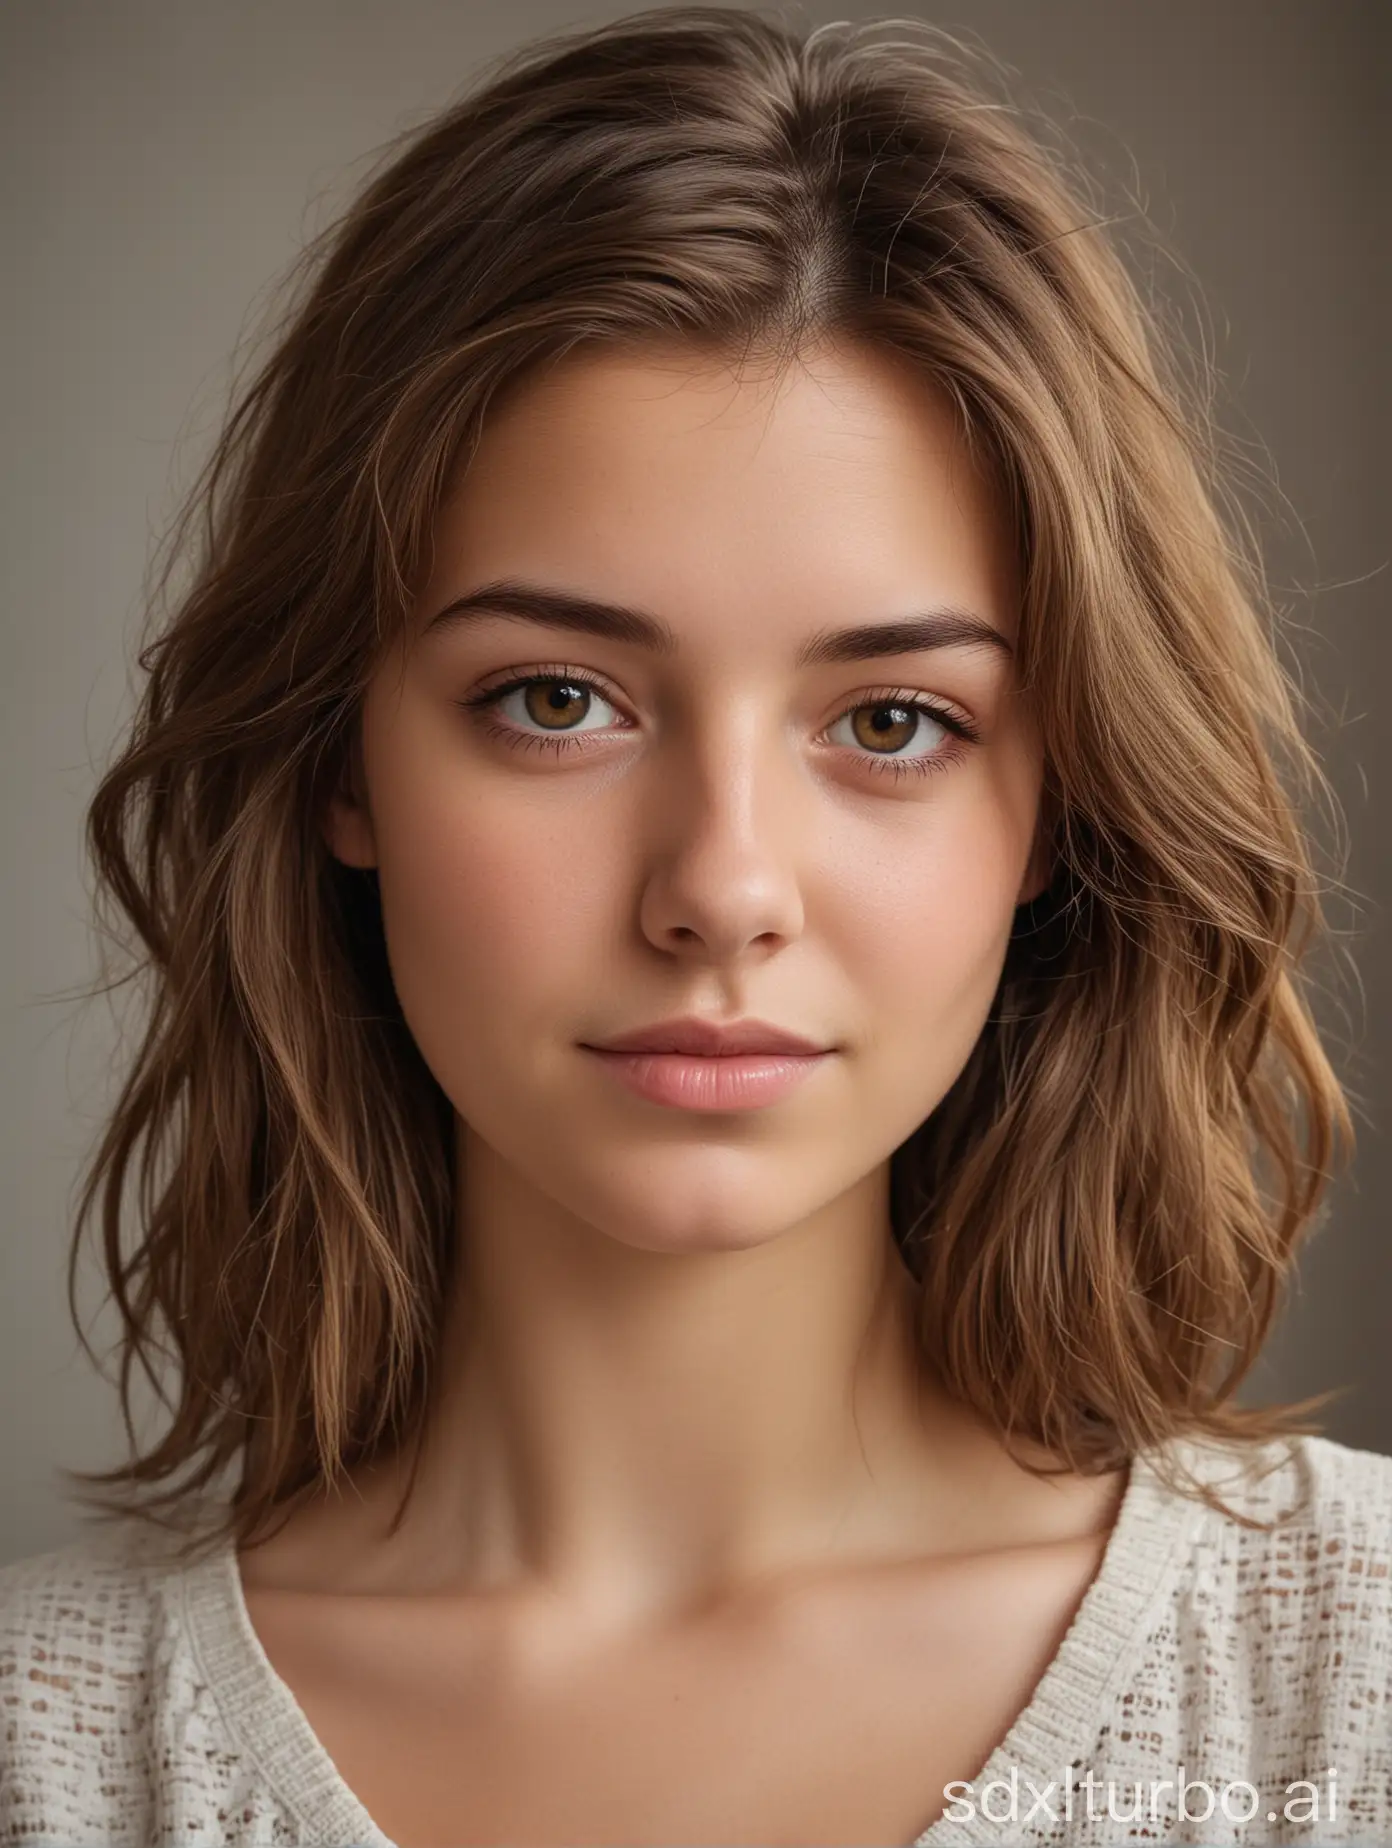 young woman, medium brown hair, portrait, close up